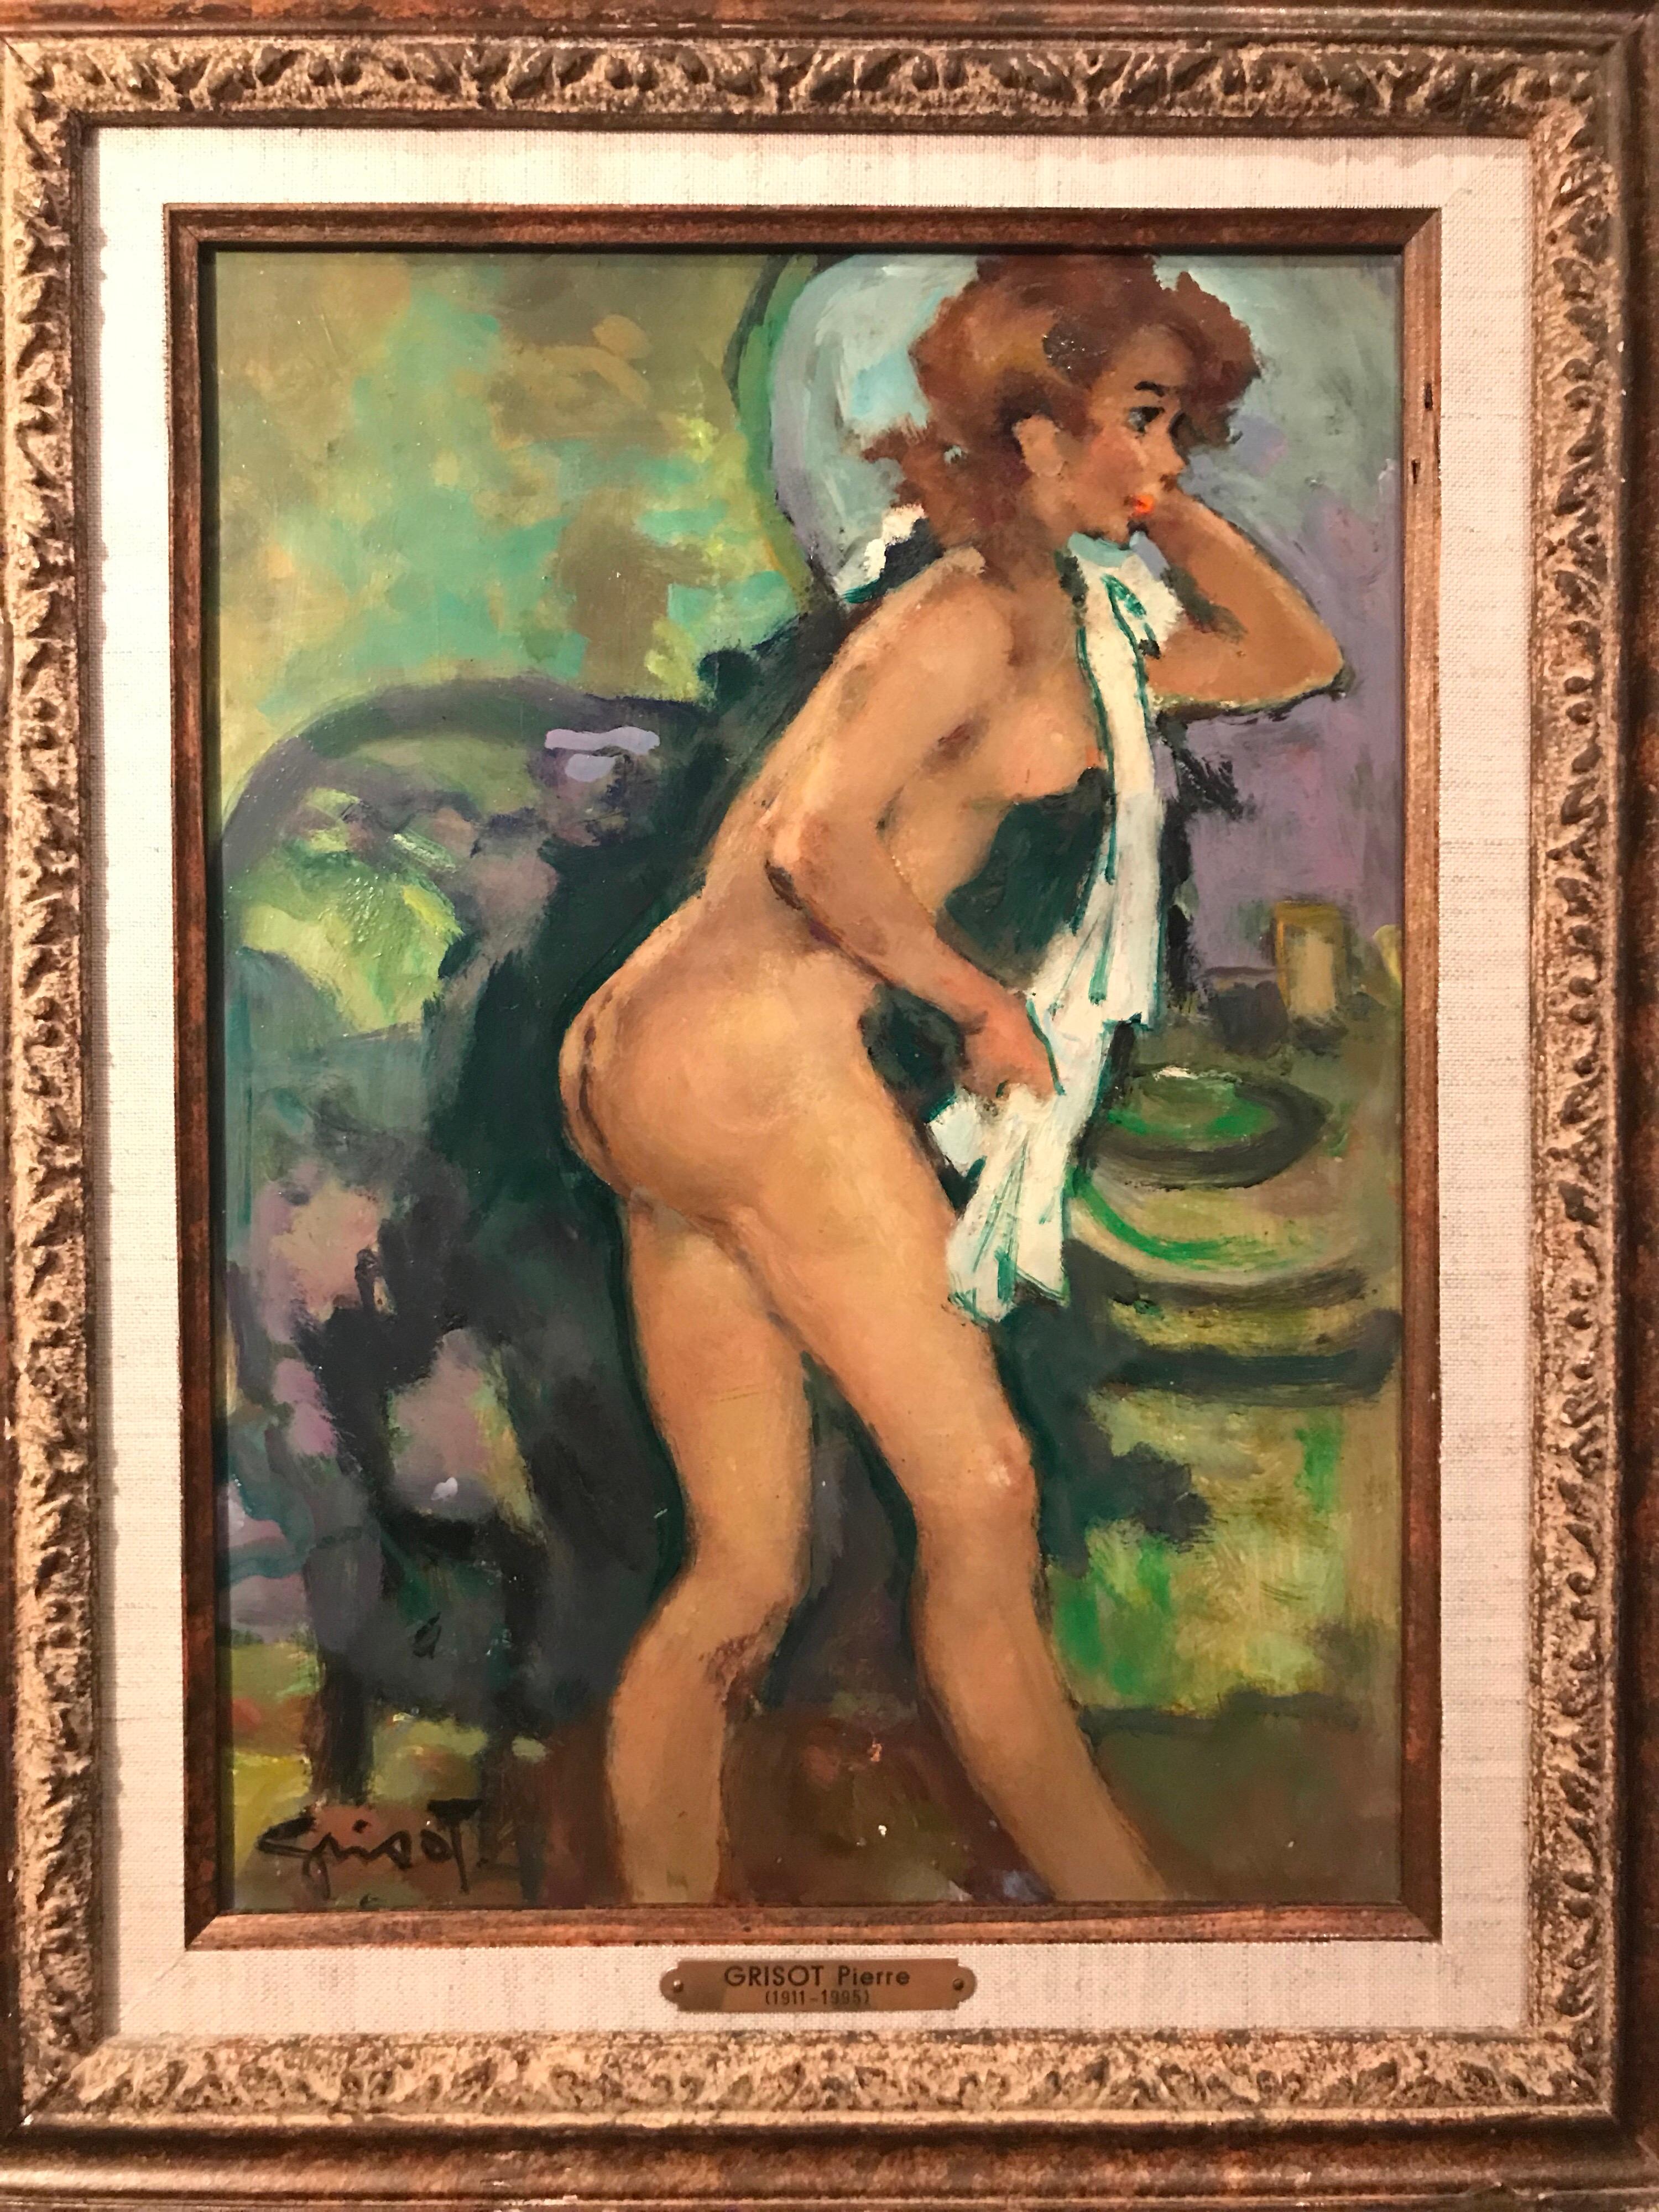 Pierre Grisot, La Toilette oil on board 1950s (1911 - 1995).
Pierre Grisot was a French post-Impressionist artist who was a member of the Parisian School of art.
One of the most enduring features of Grisot's work was his brilliant use of color and